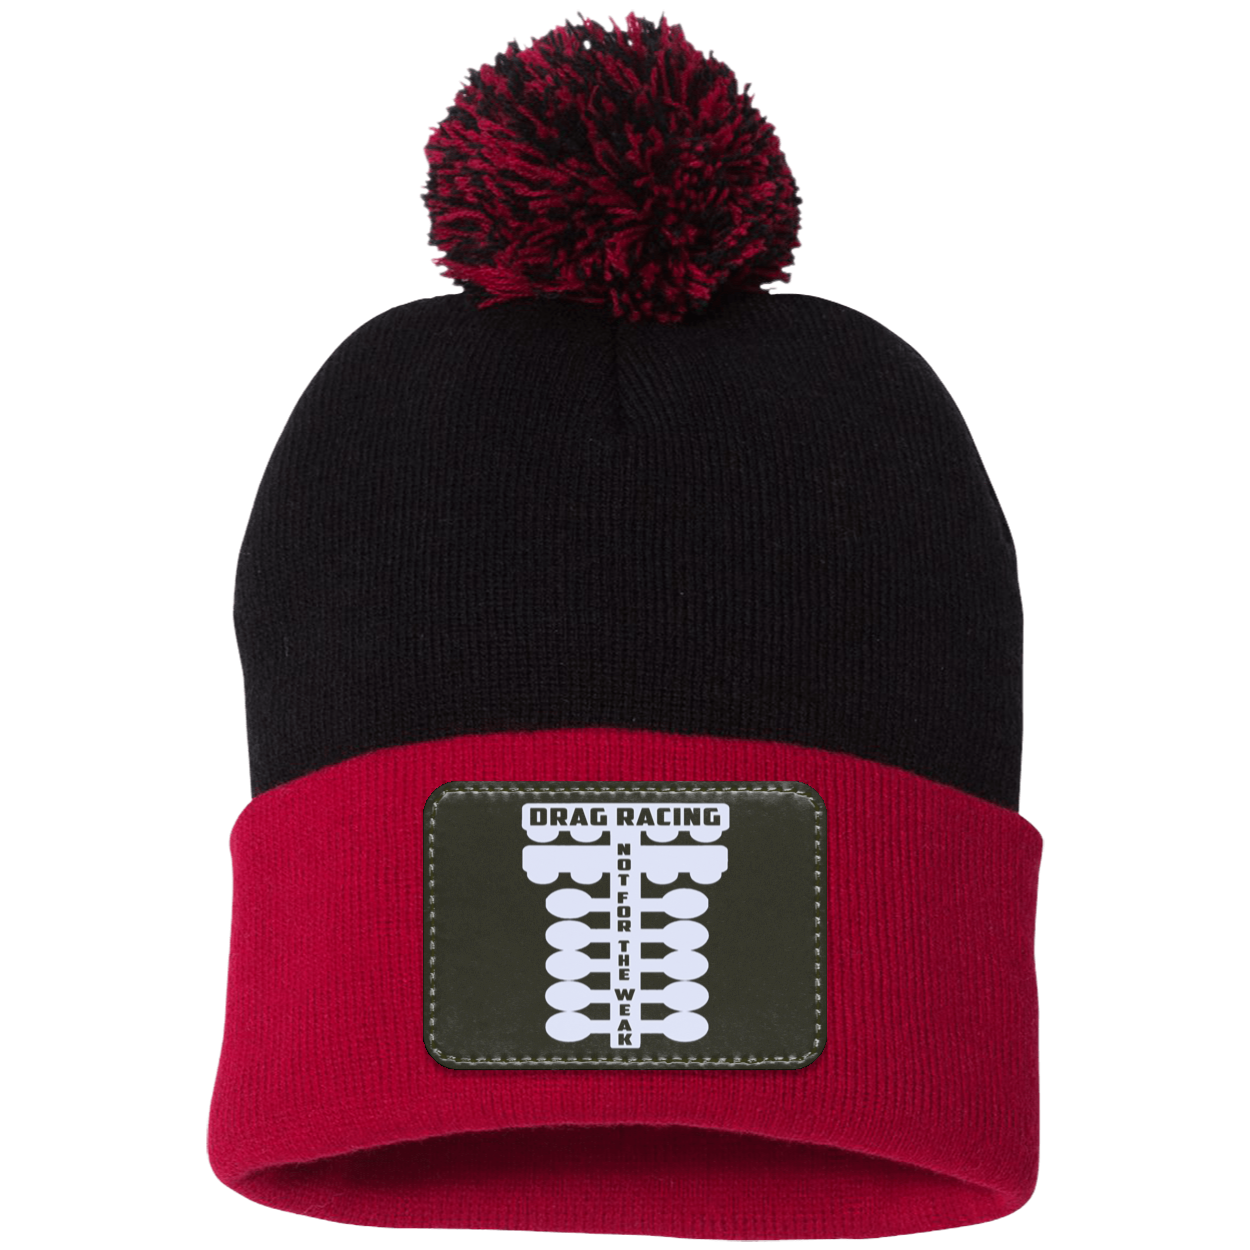 Drag Racing Not For The Weak Patched Pom Pom Knit Cap